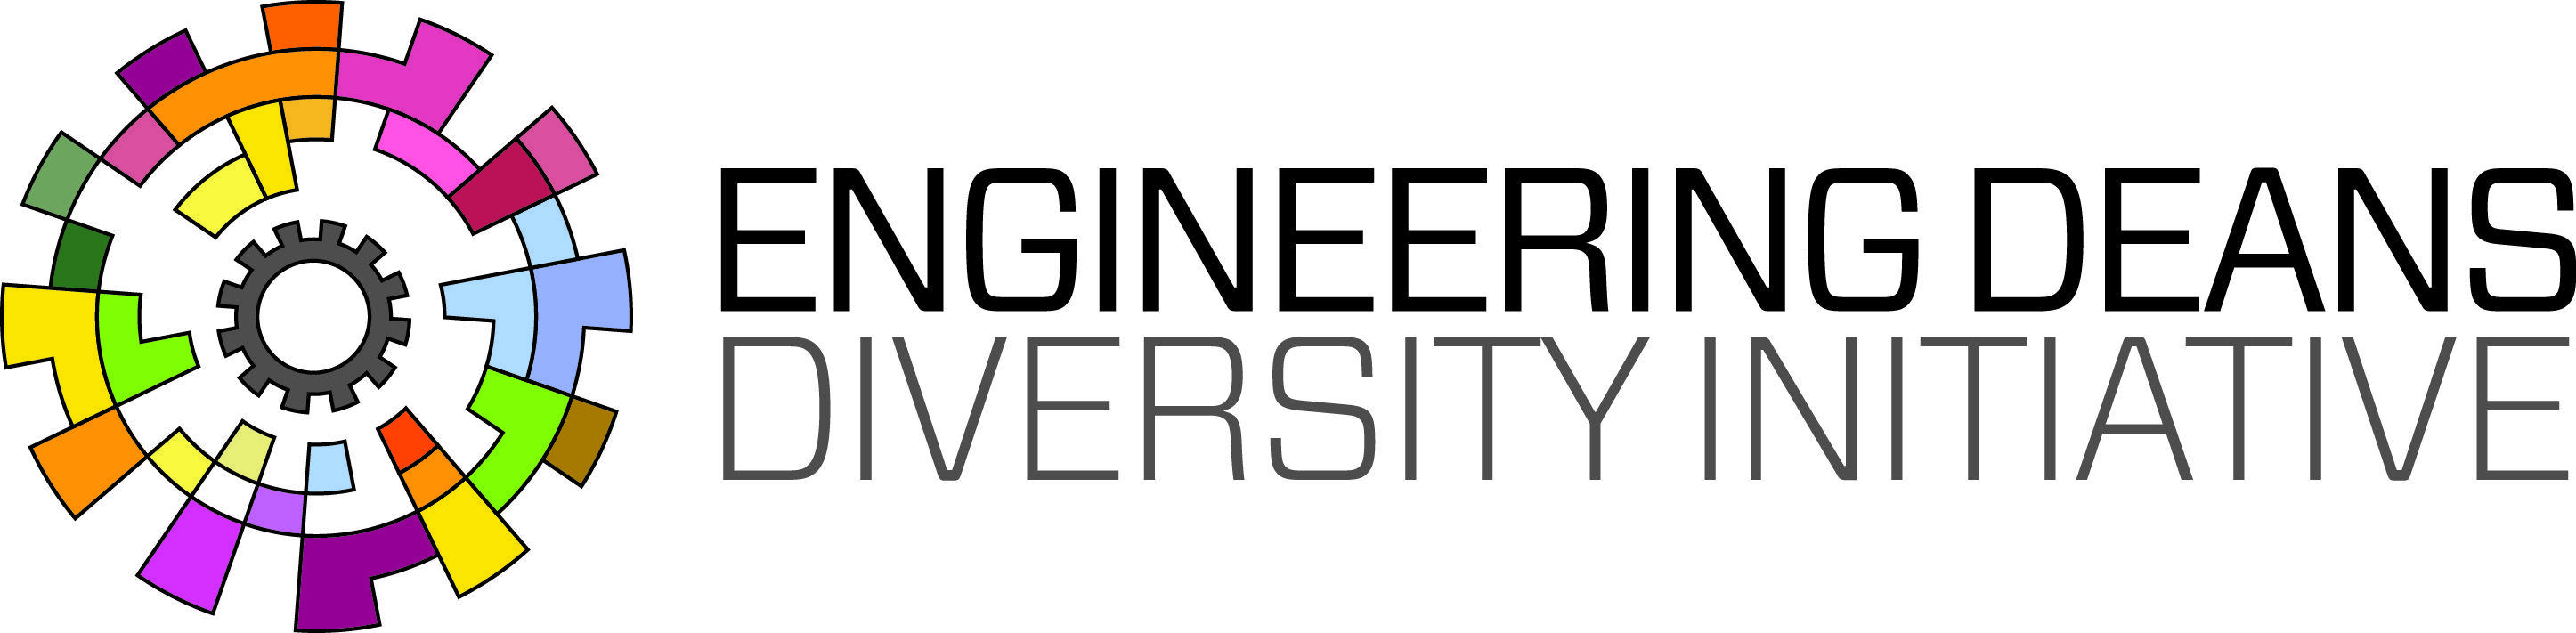 Wide Logo - Deans Diversity Logos: American Society for Engineering Education